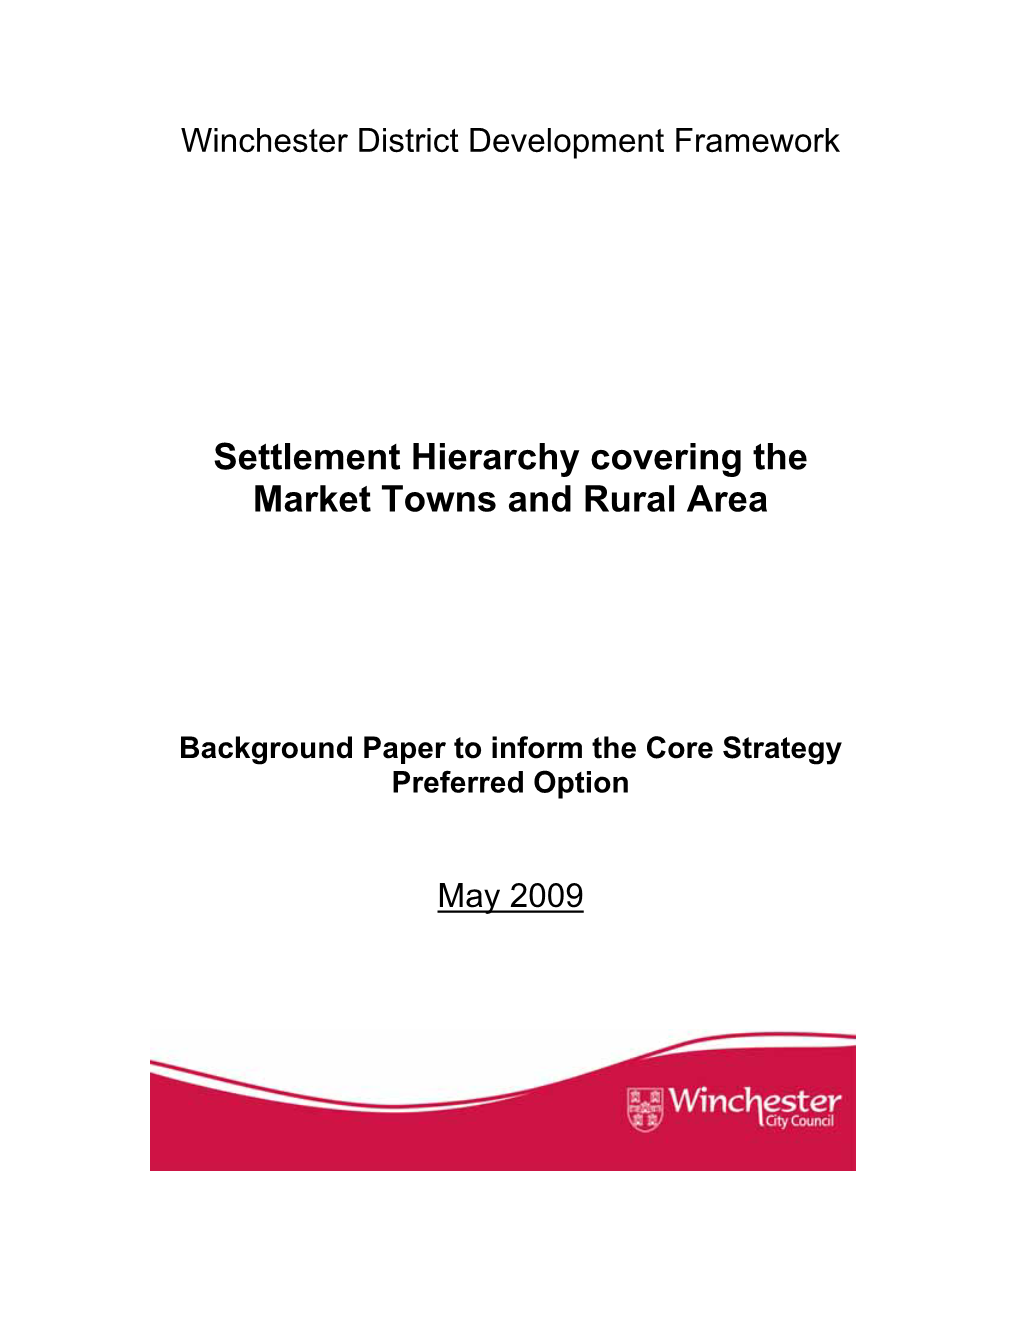 Settlement Hierarchy Covering the Market Towns and Rural Areas